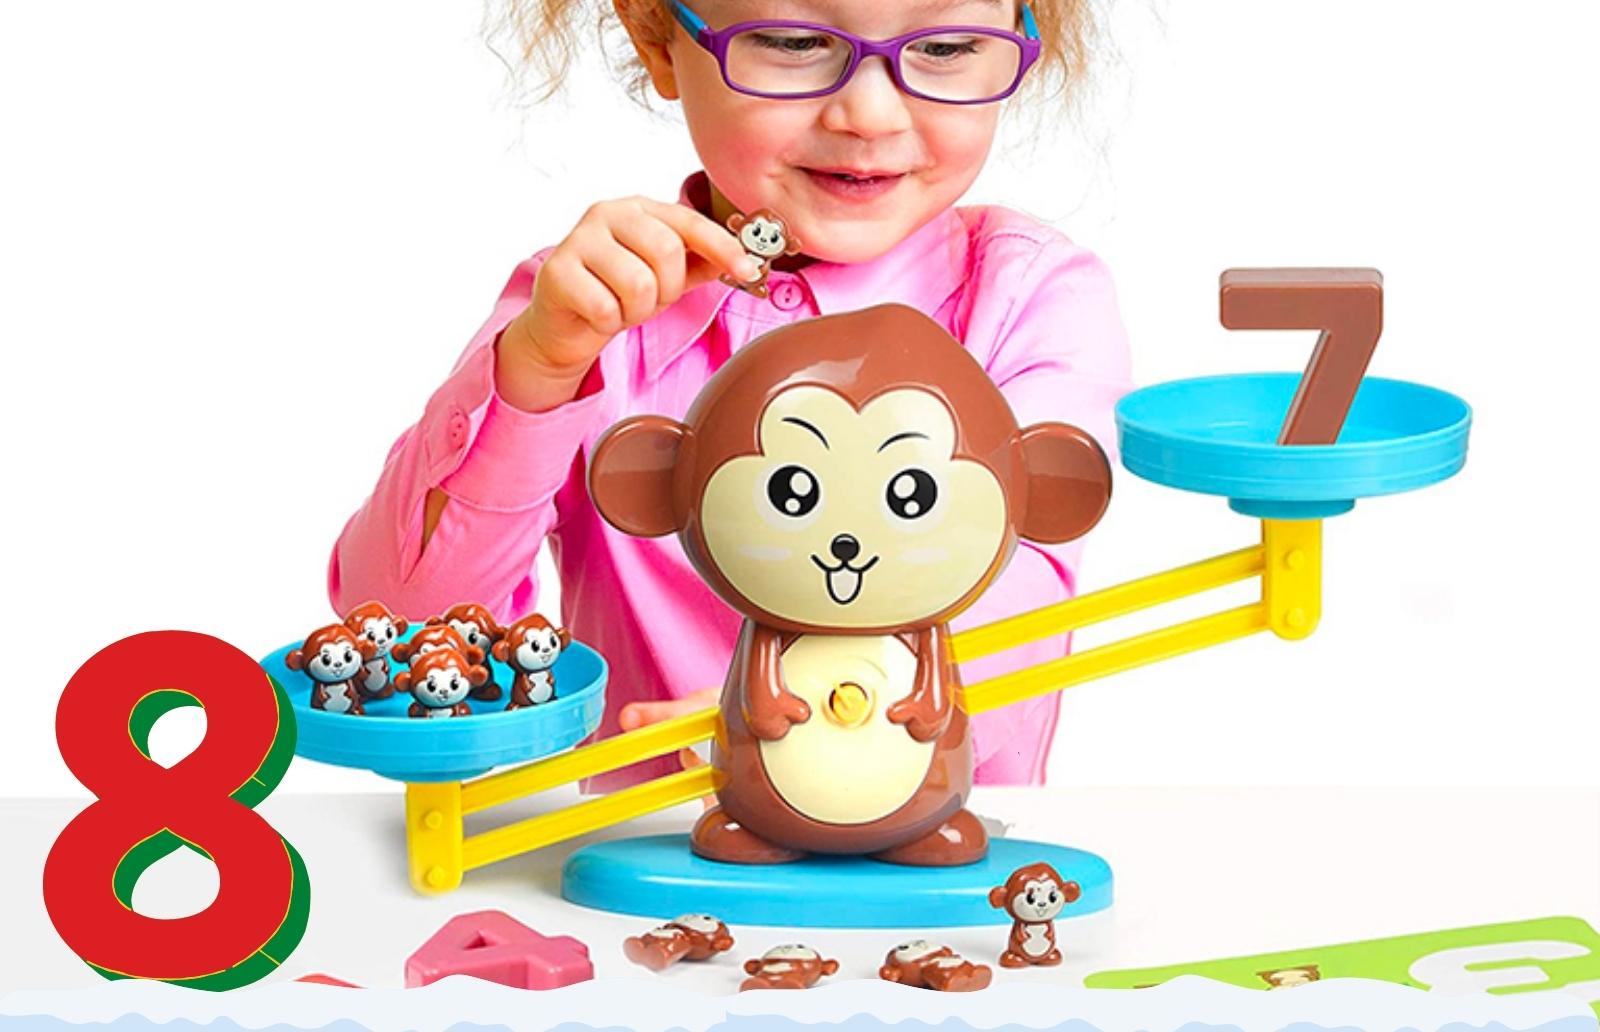 a-granddaughter-playing-balance-math-game-with-pet-figurines